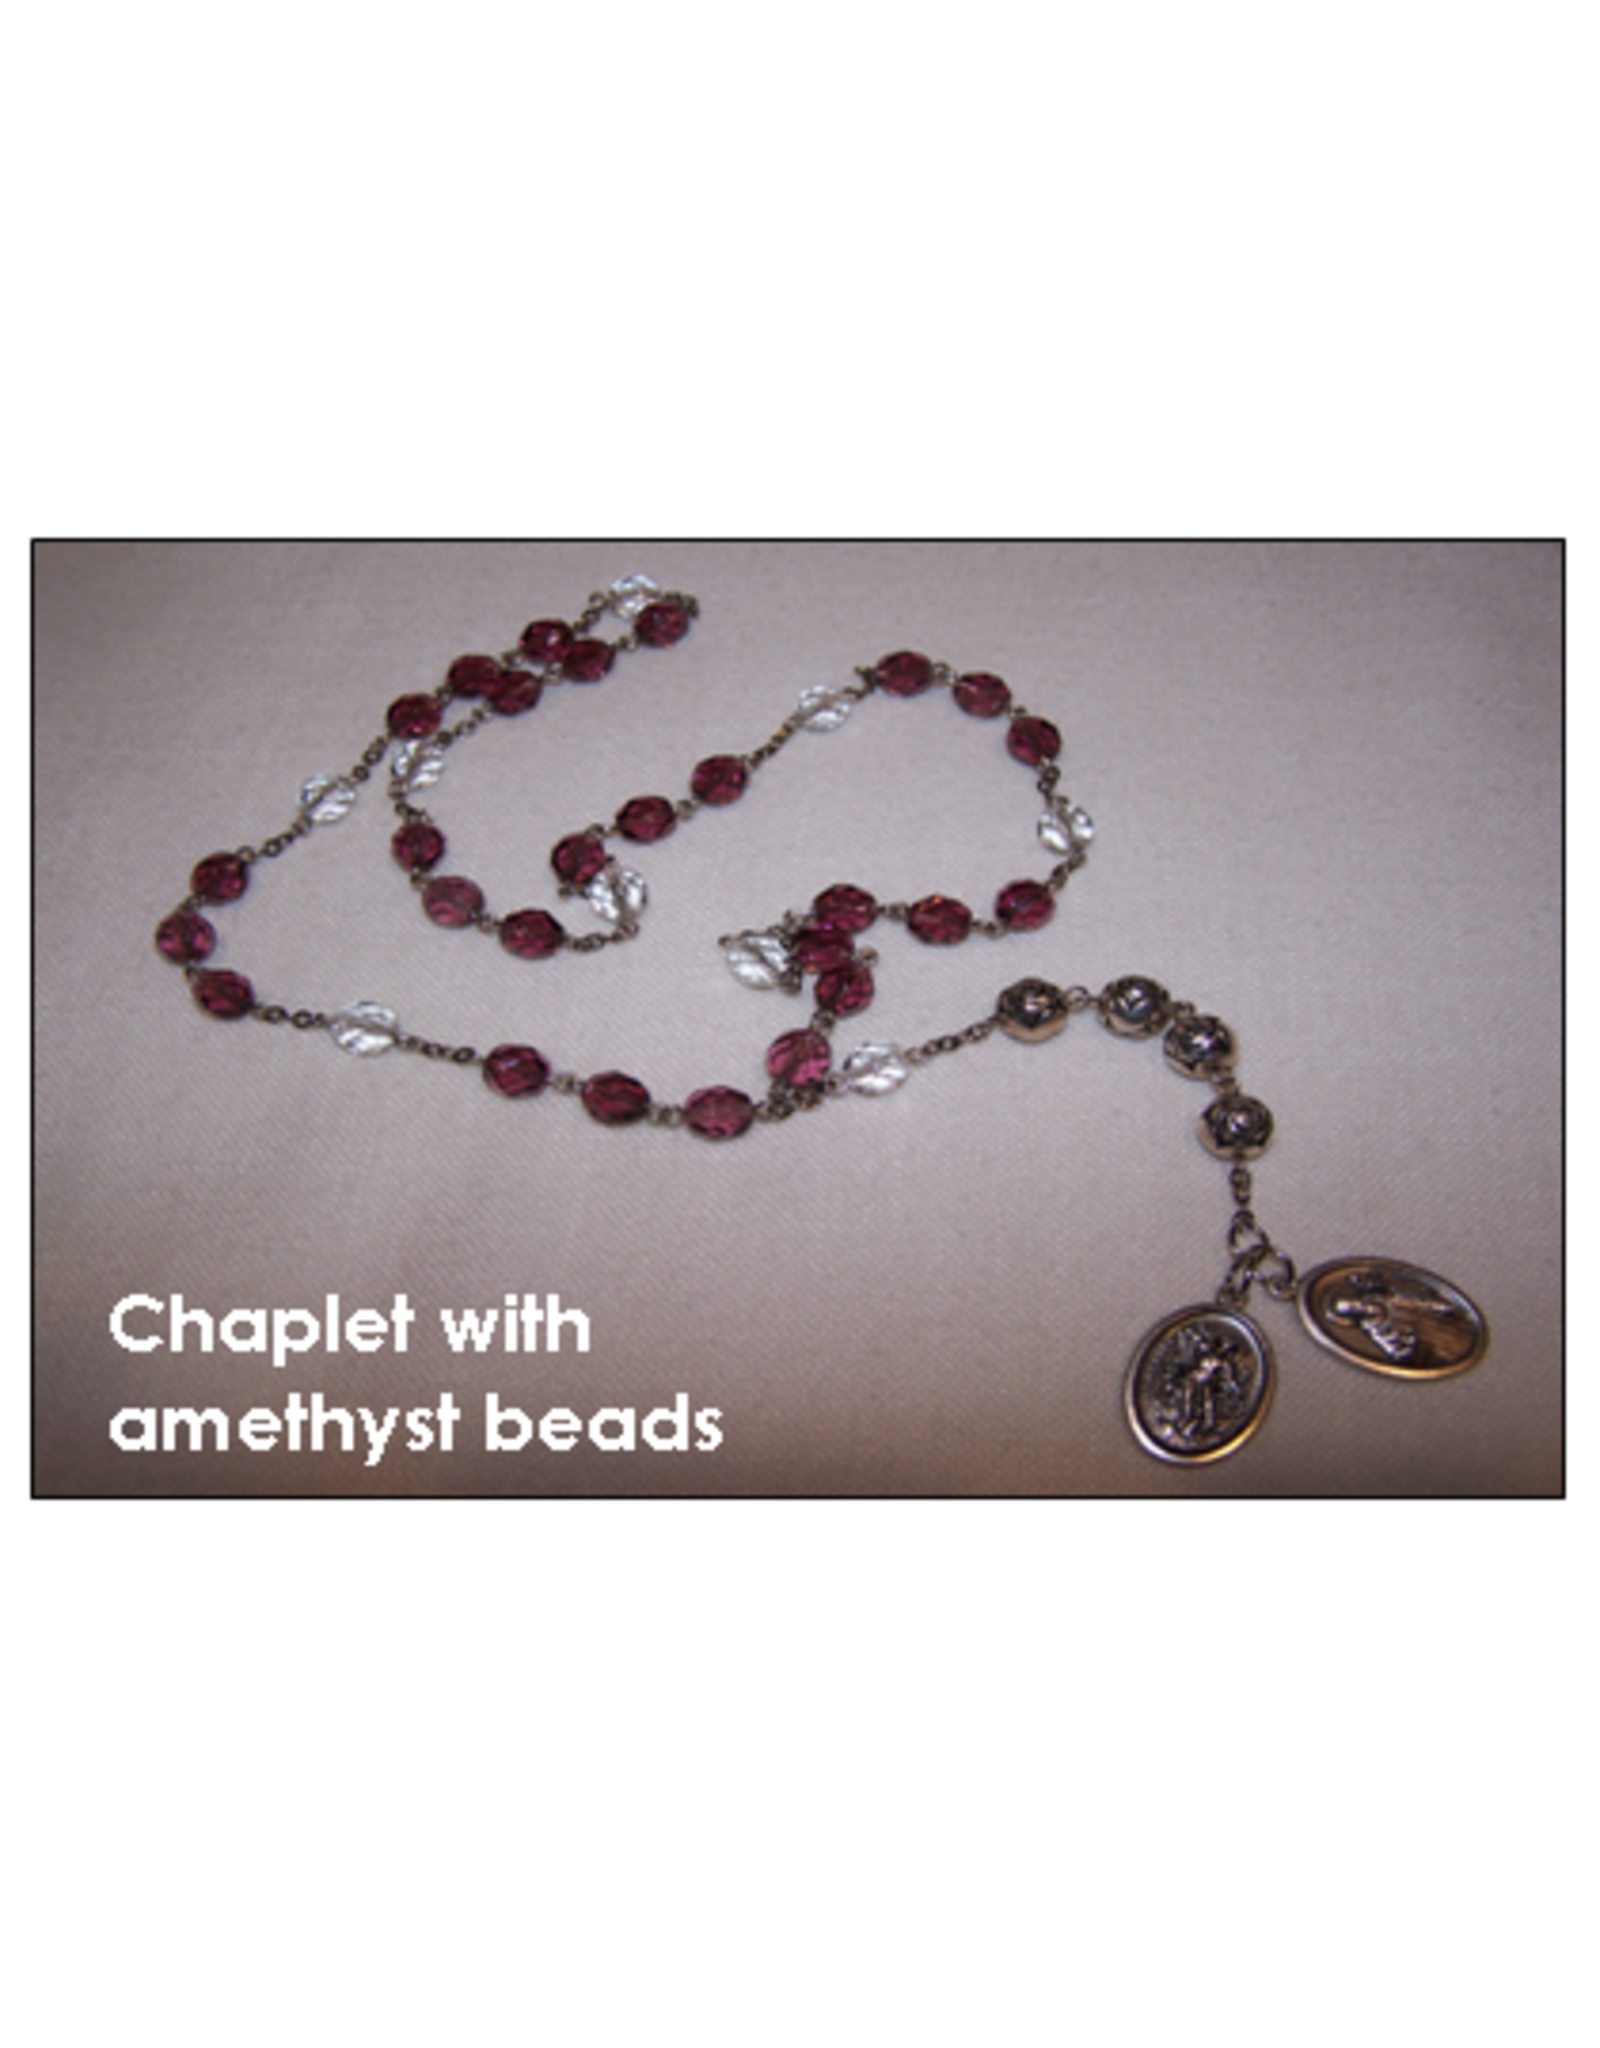 Miraculous lady of roses St Michael Chaplet - Amethyst Beads w prayer card